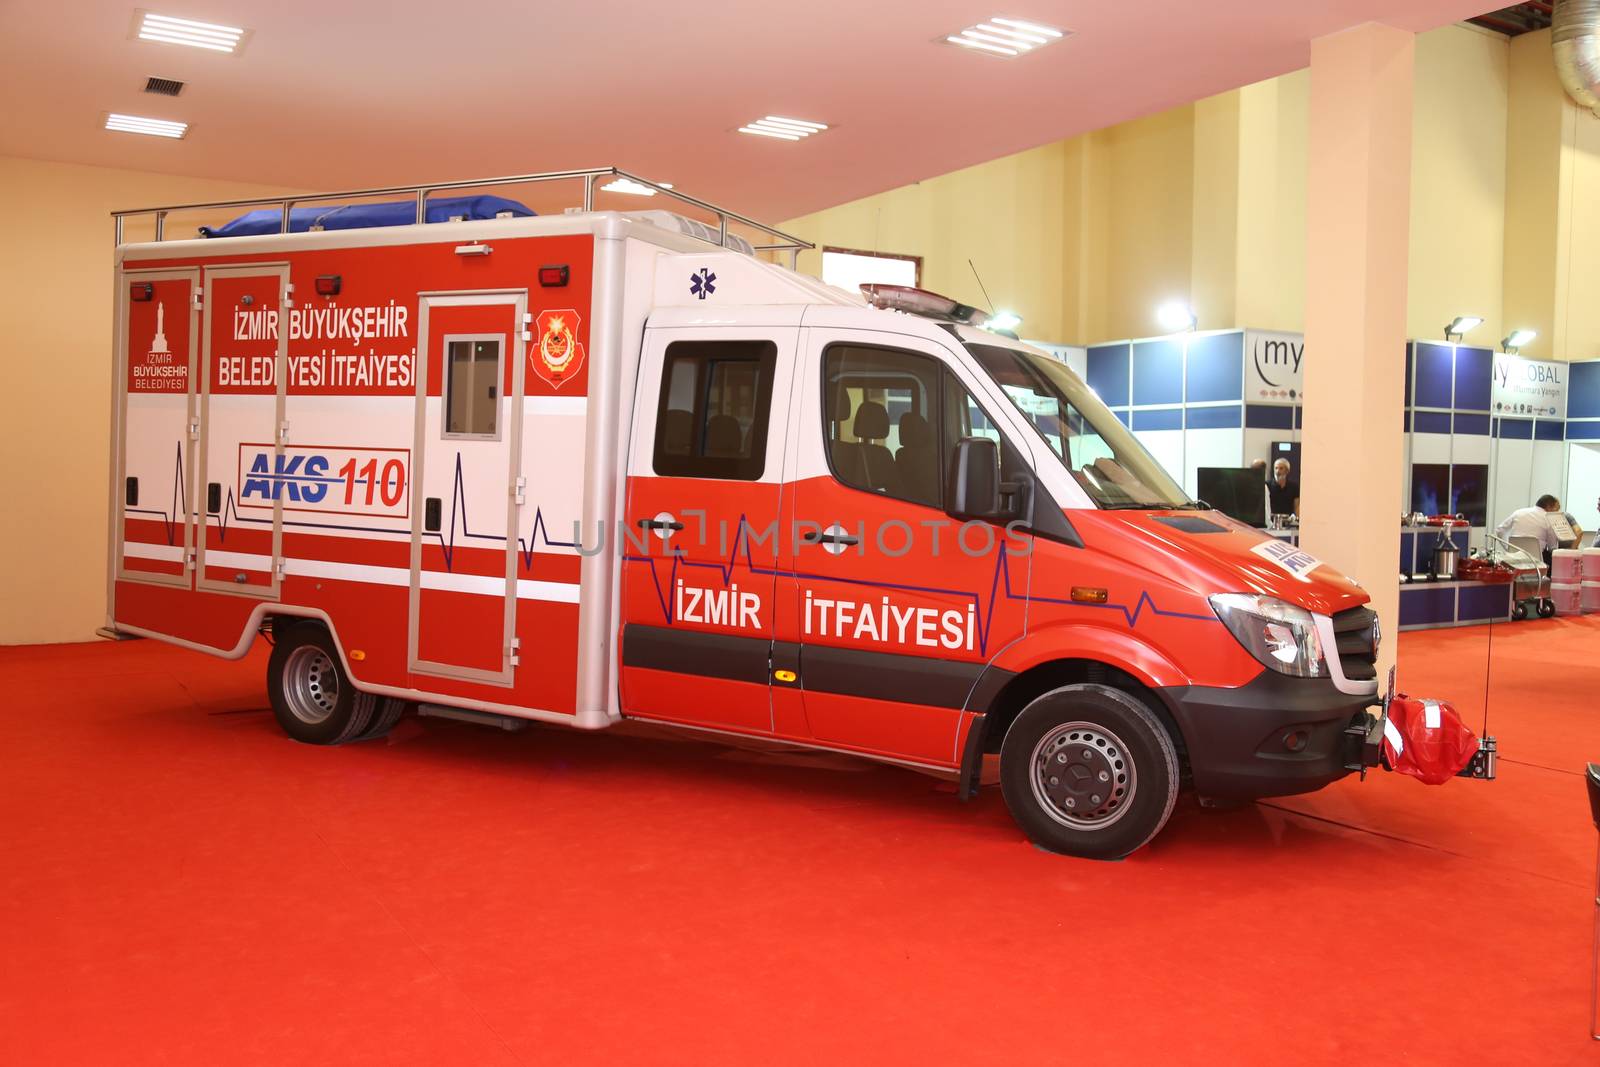 ISTANBUL, TURKEY - SEPTEMBER 12, 2015: Fire Truck in ISAF Security fair in Istanbul Fair Center